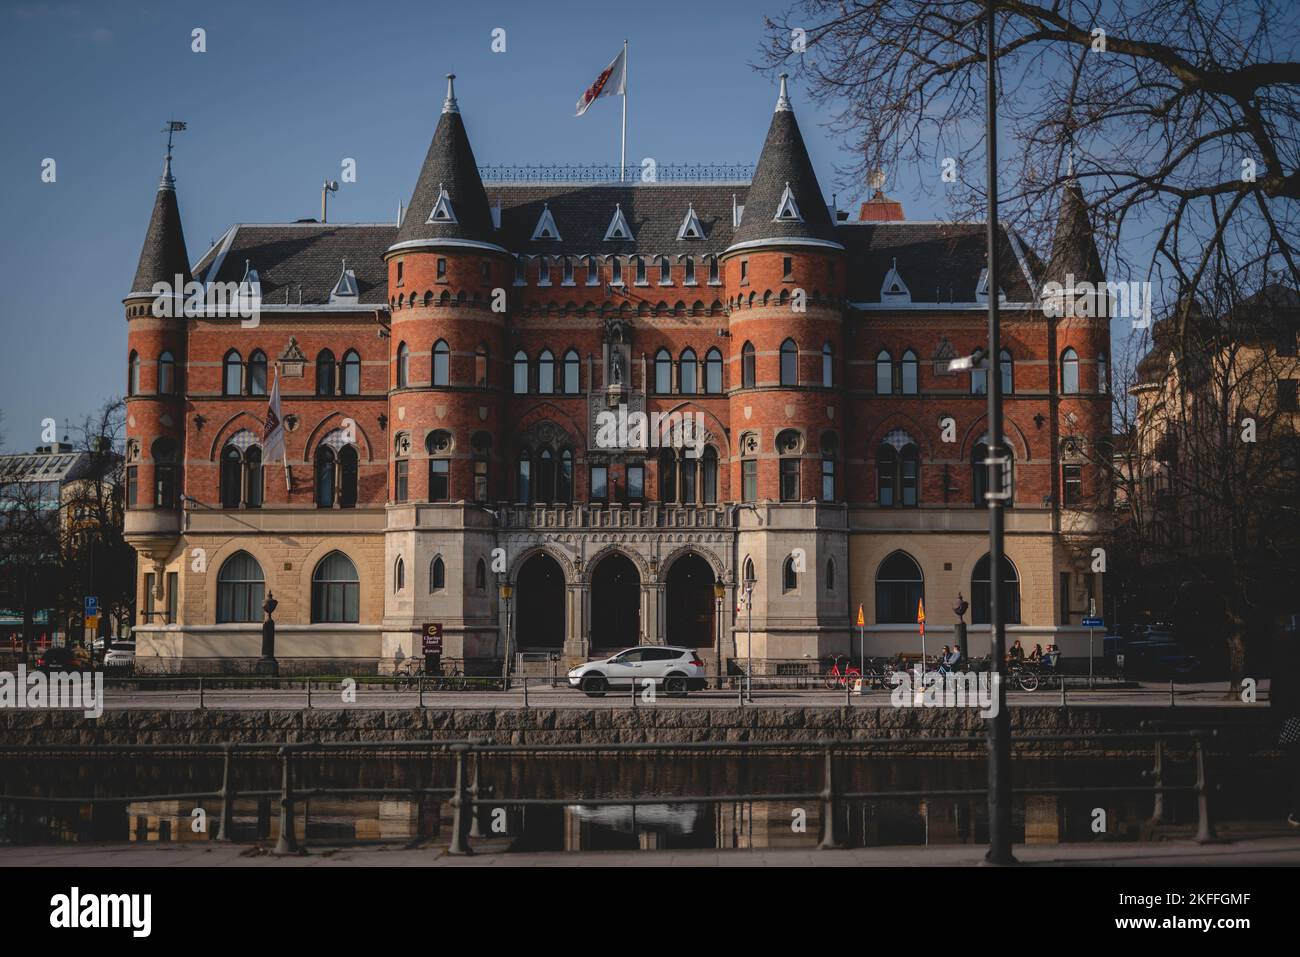 The exterior of the Clarion Hotel Building in Orebro sweden Stock Photo